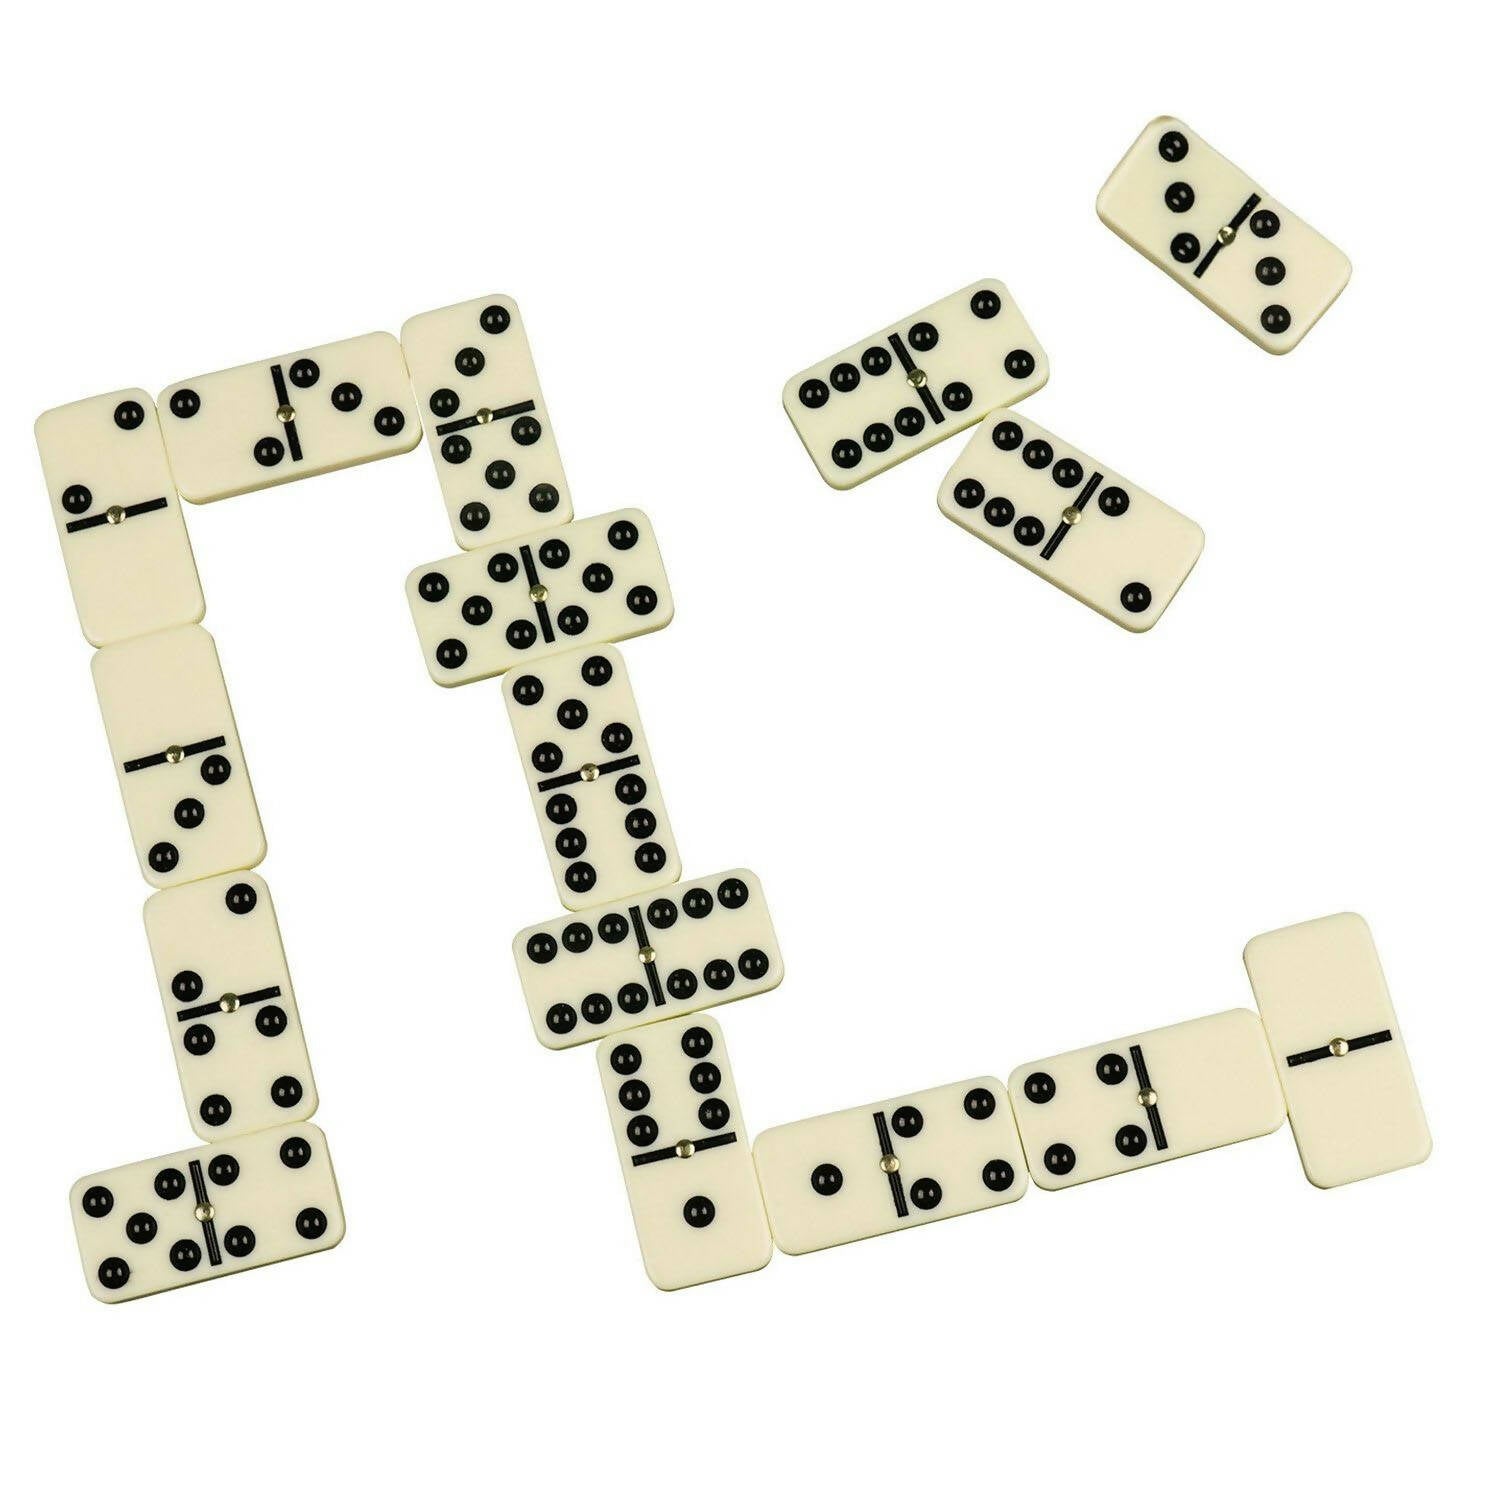 Dominoes Set- 28 Pieces Double-Six Ivory Domino Tiles Set Classic Numbers Table Game